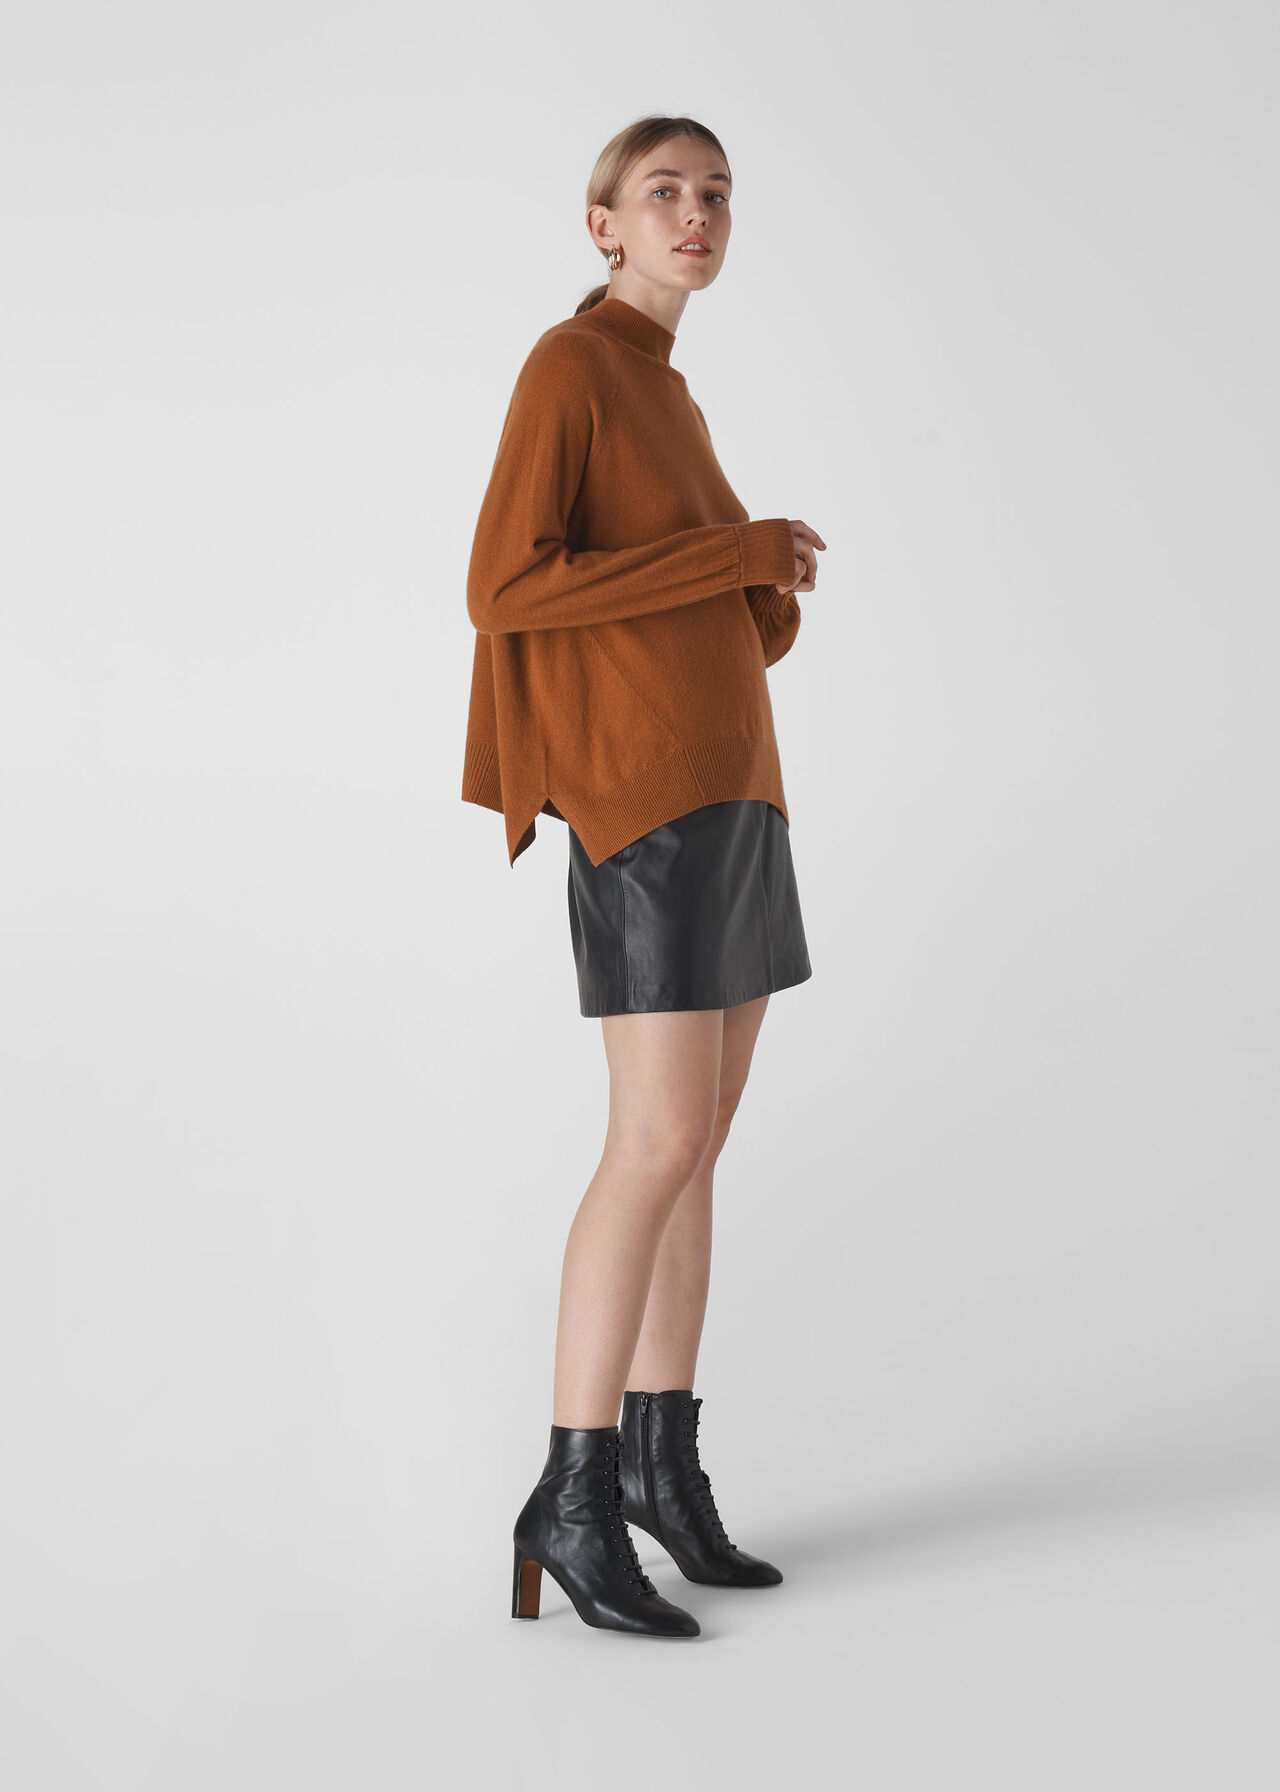 Funnel Neck Cashmere Knit Toffee